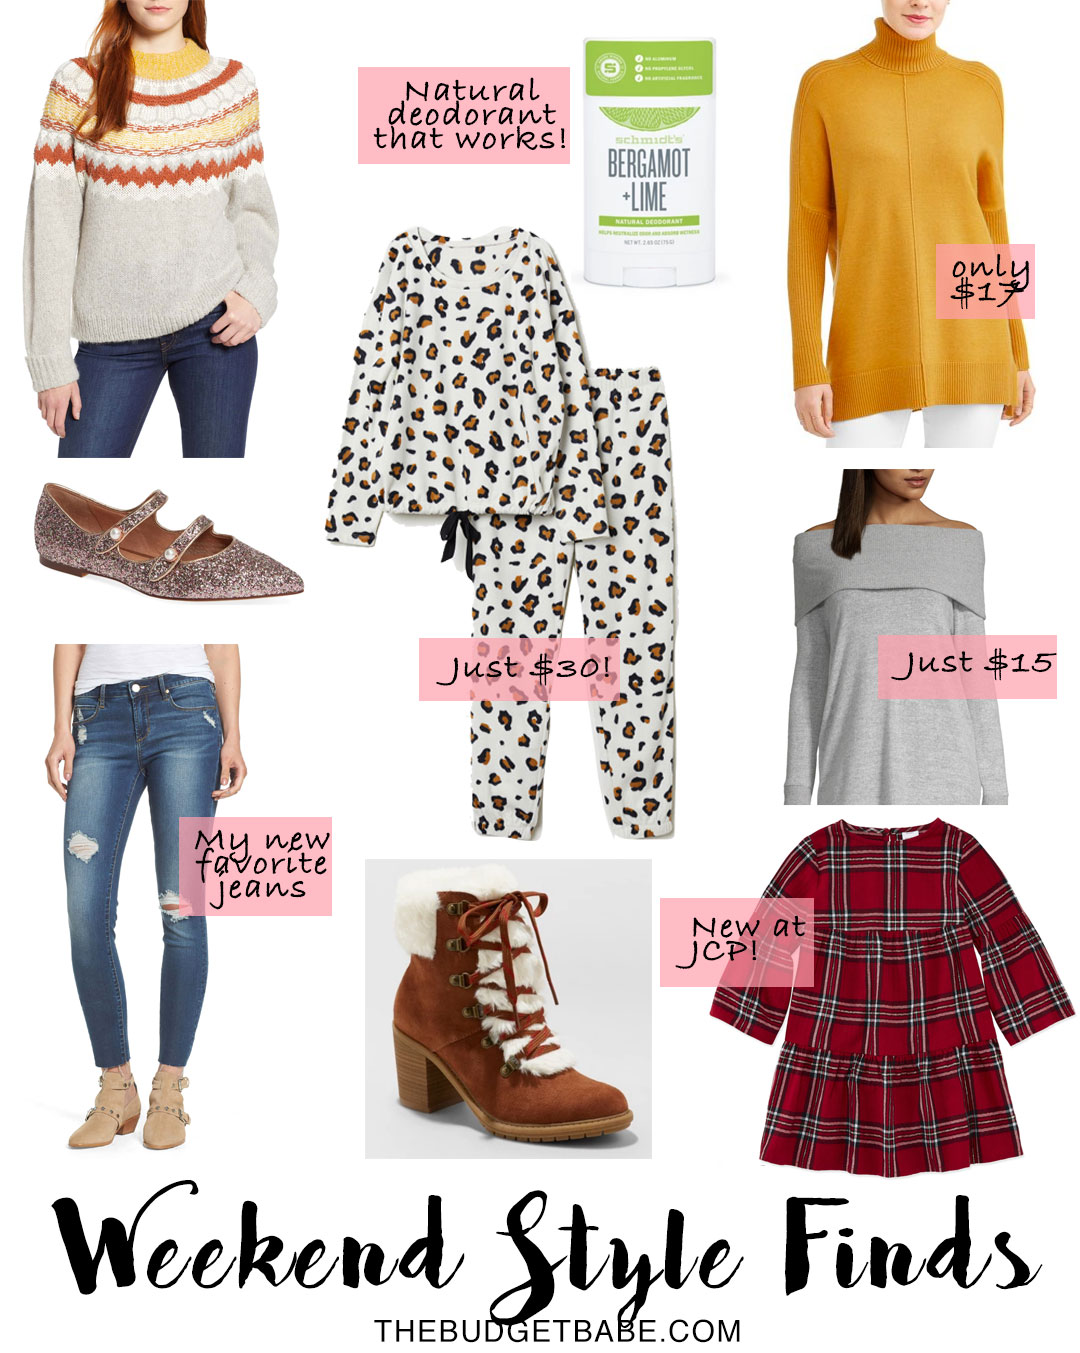 This blogger finds the cutest fashions under $40!